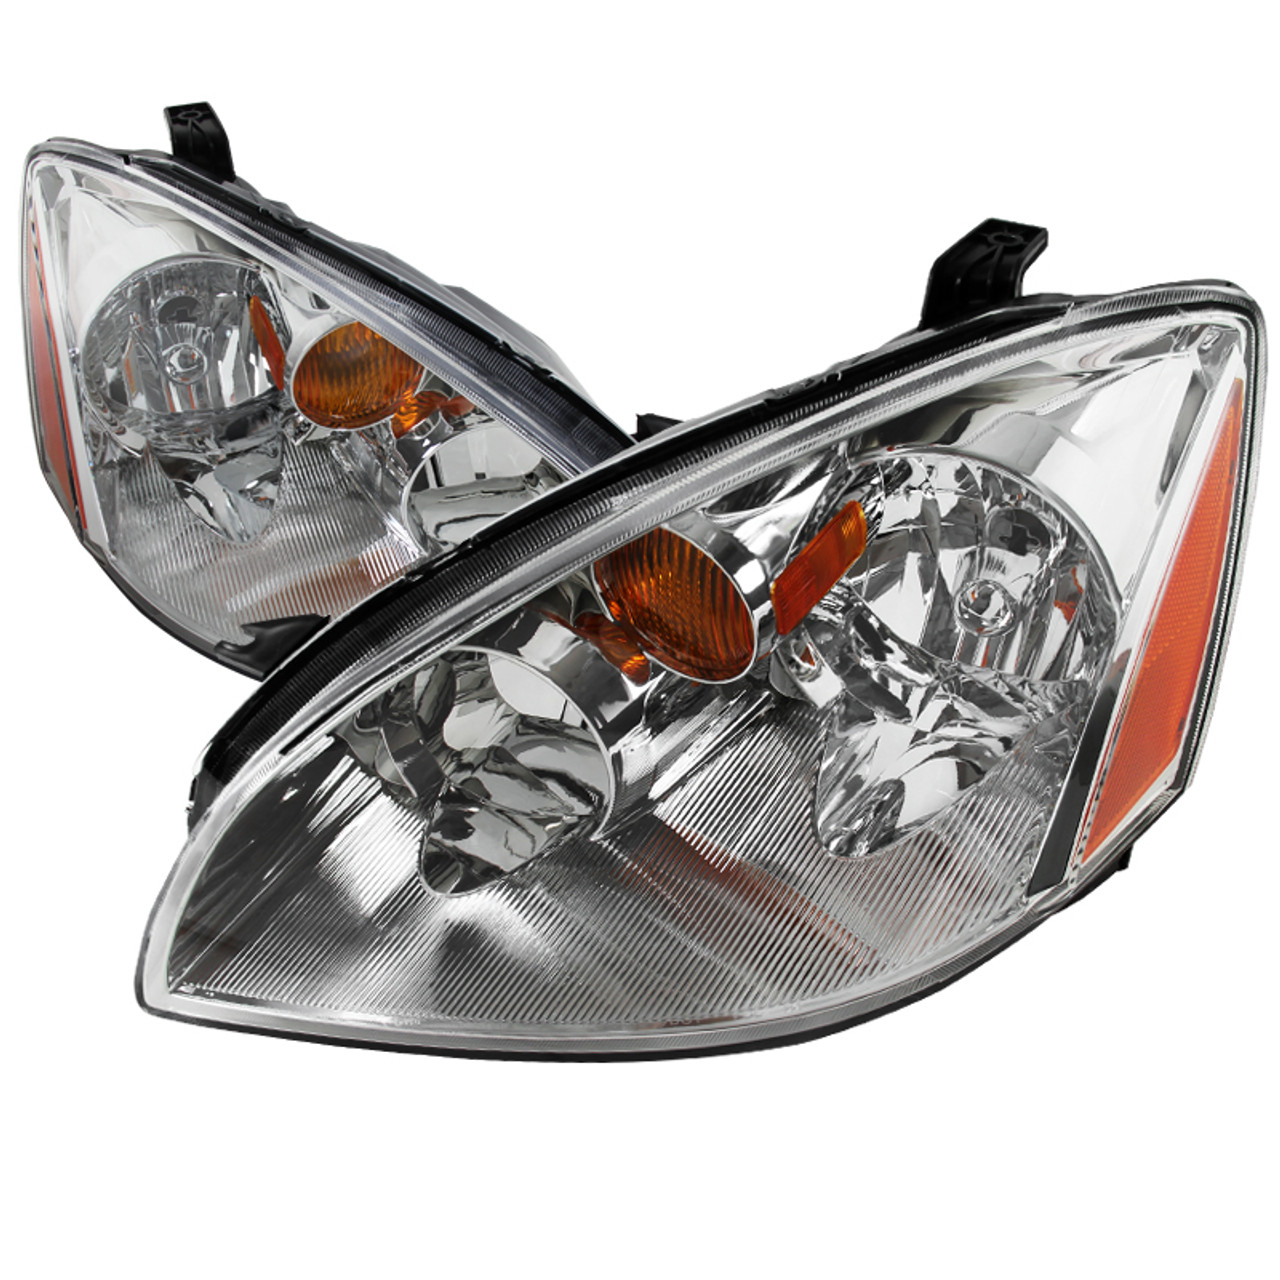 2002-2004 Nissan Altima Factory Style Headlights - Chrome/Clear